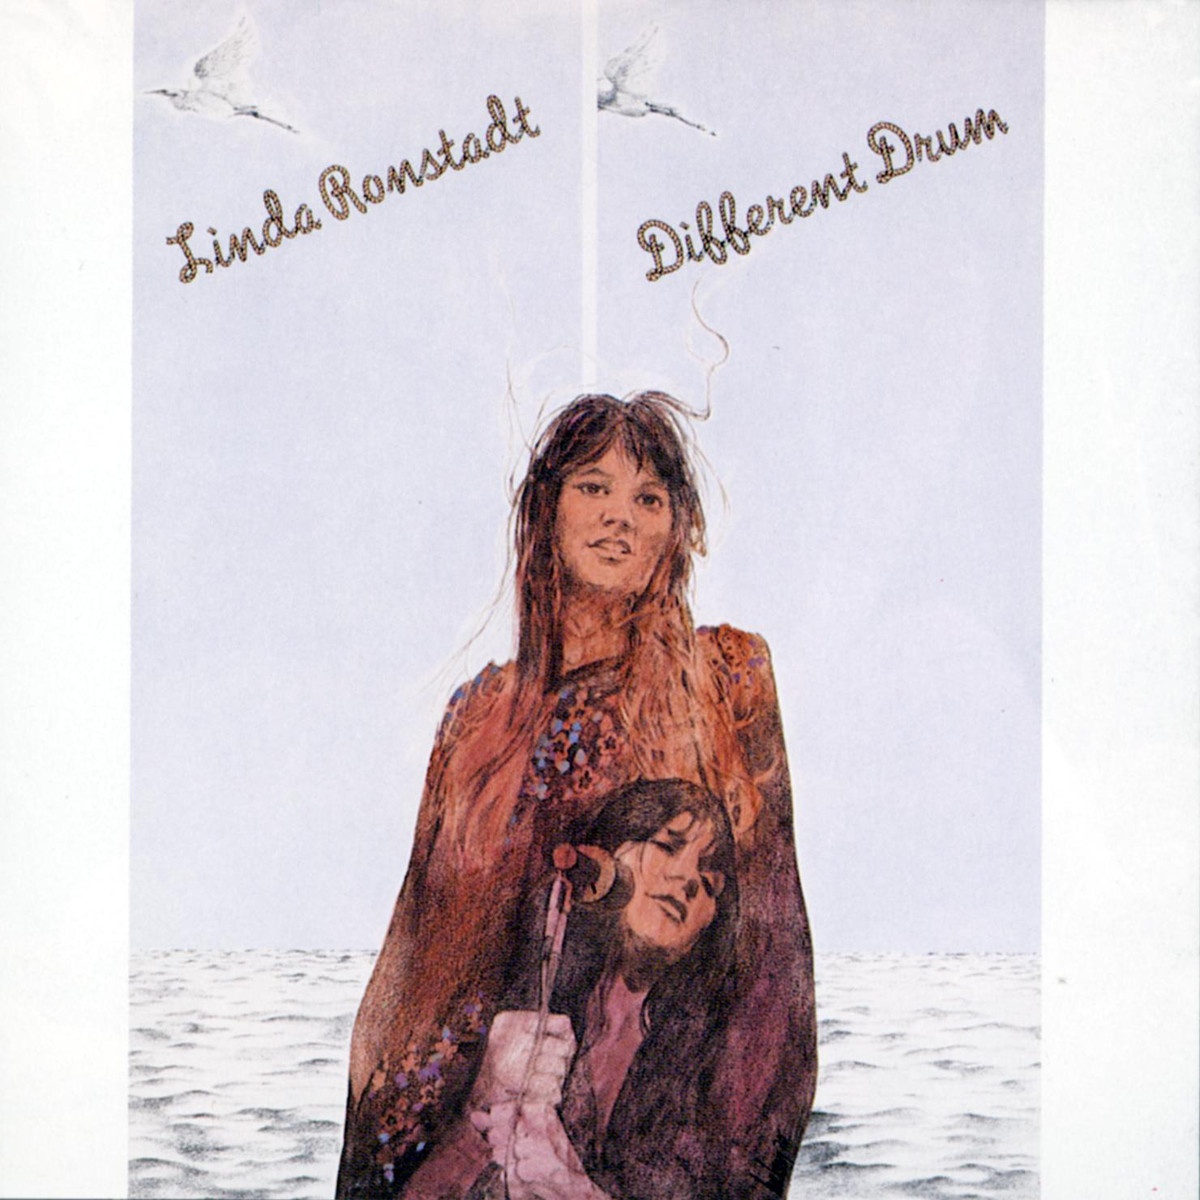 (Up To My Neck In) High Muddy Water (Album Version) (Feat. Linda Ronstadt)